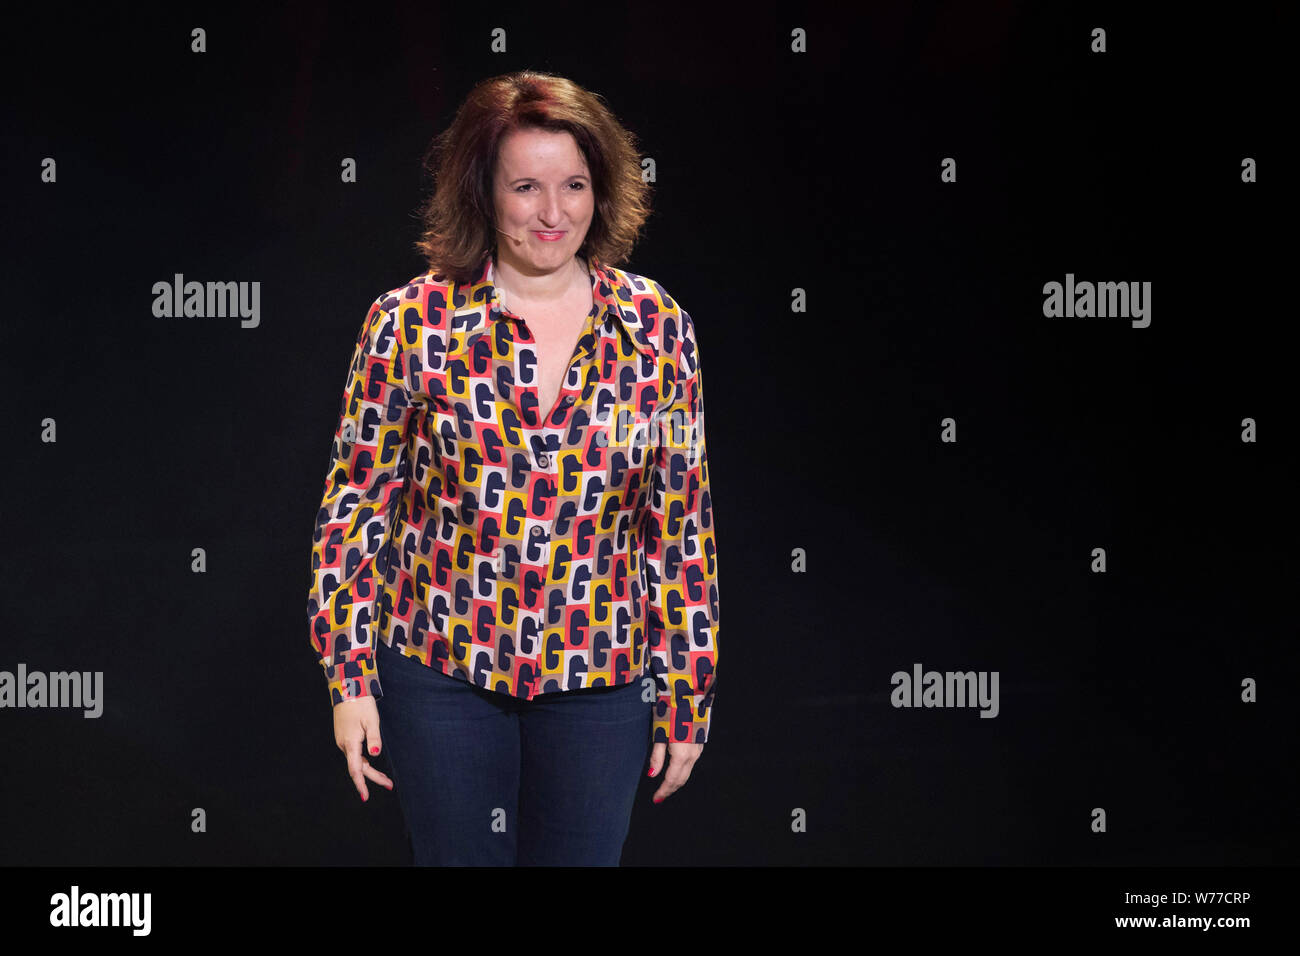 Humorist Anne Roumanoff on stage at Grimaldi Forum in Monaco on March 23, 2019, on the occasion of the “Serenissimes de l'Humour” show Stock Photo